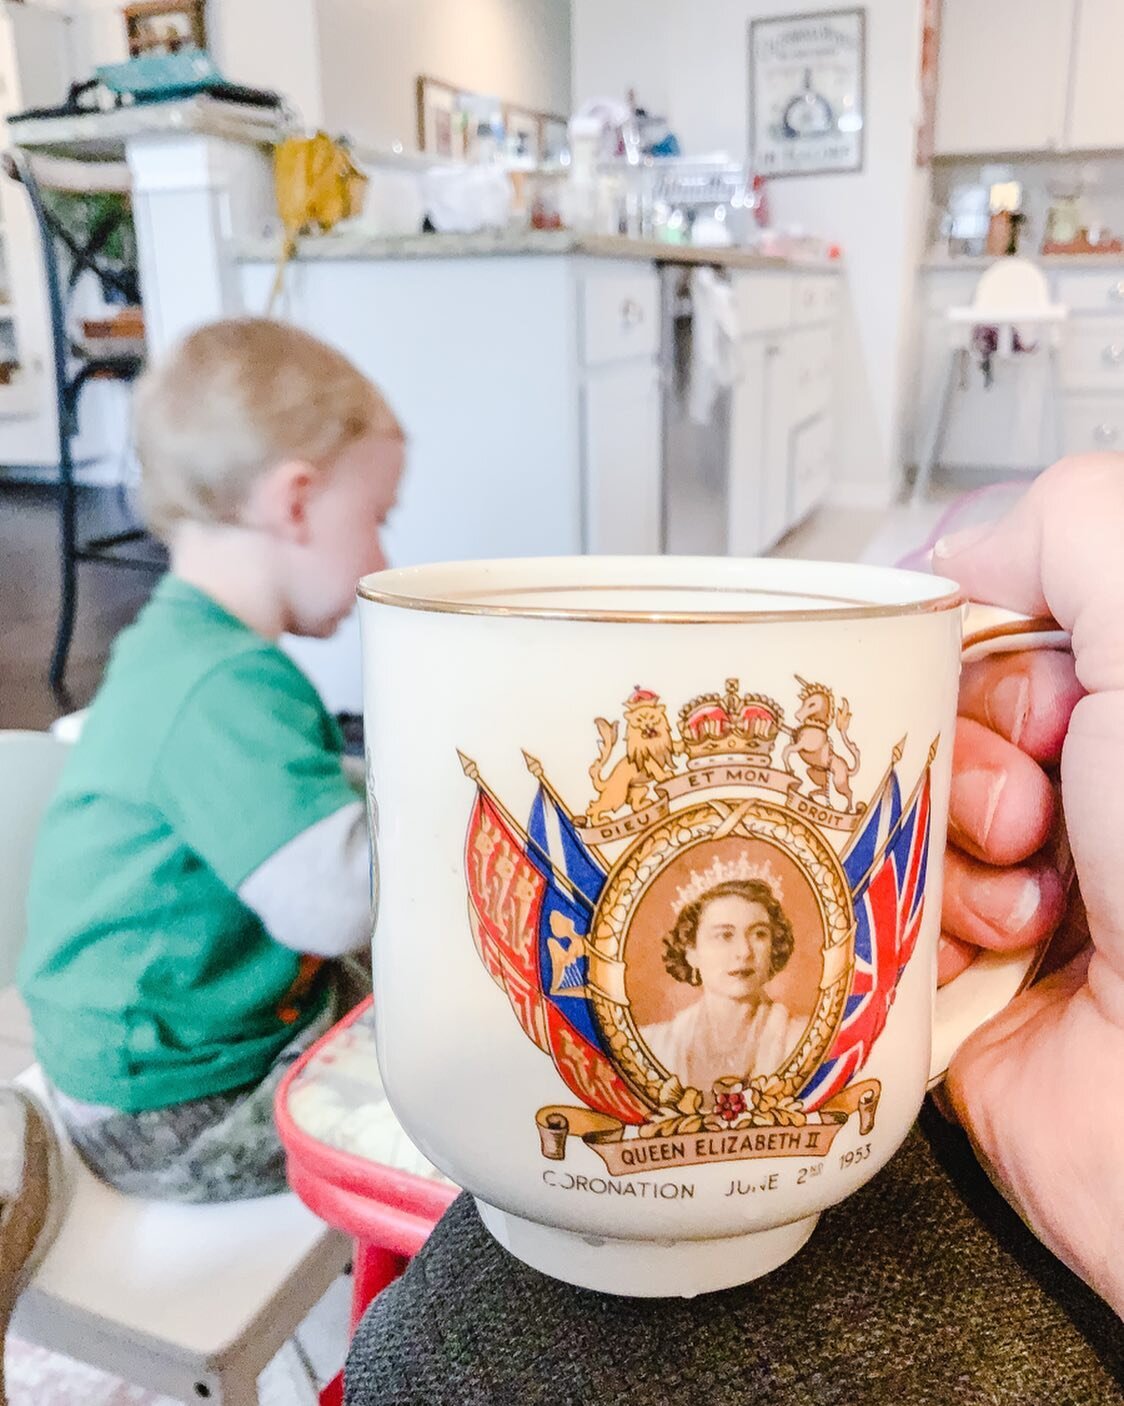 Lots of change happening in the UK this week. When you feel a long way from home, drinking tea in this mug helps. So many things to say about this incredible woman. A strong servant hearted leader. 🇬🇧👑🫖#thequeen #strongwomen #longwayfromhome